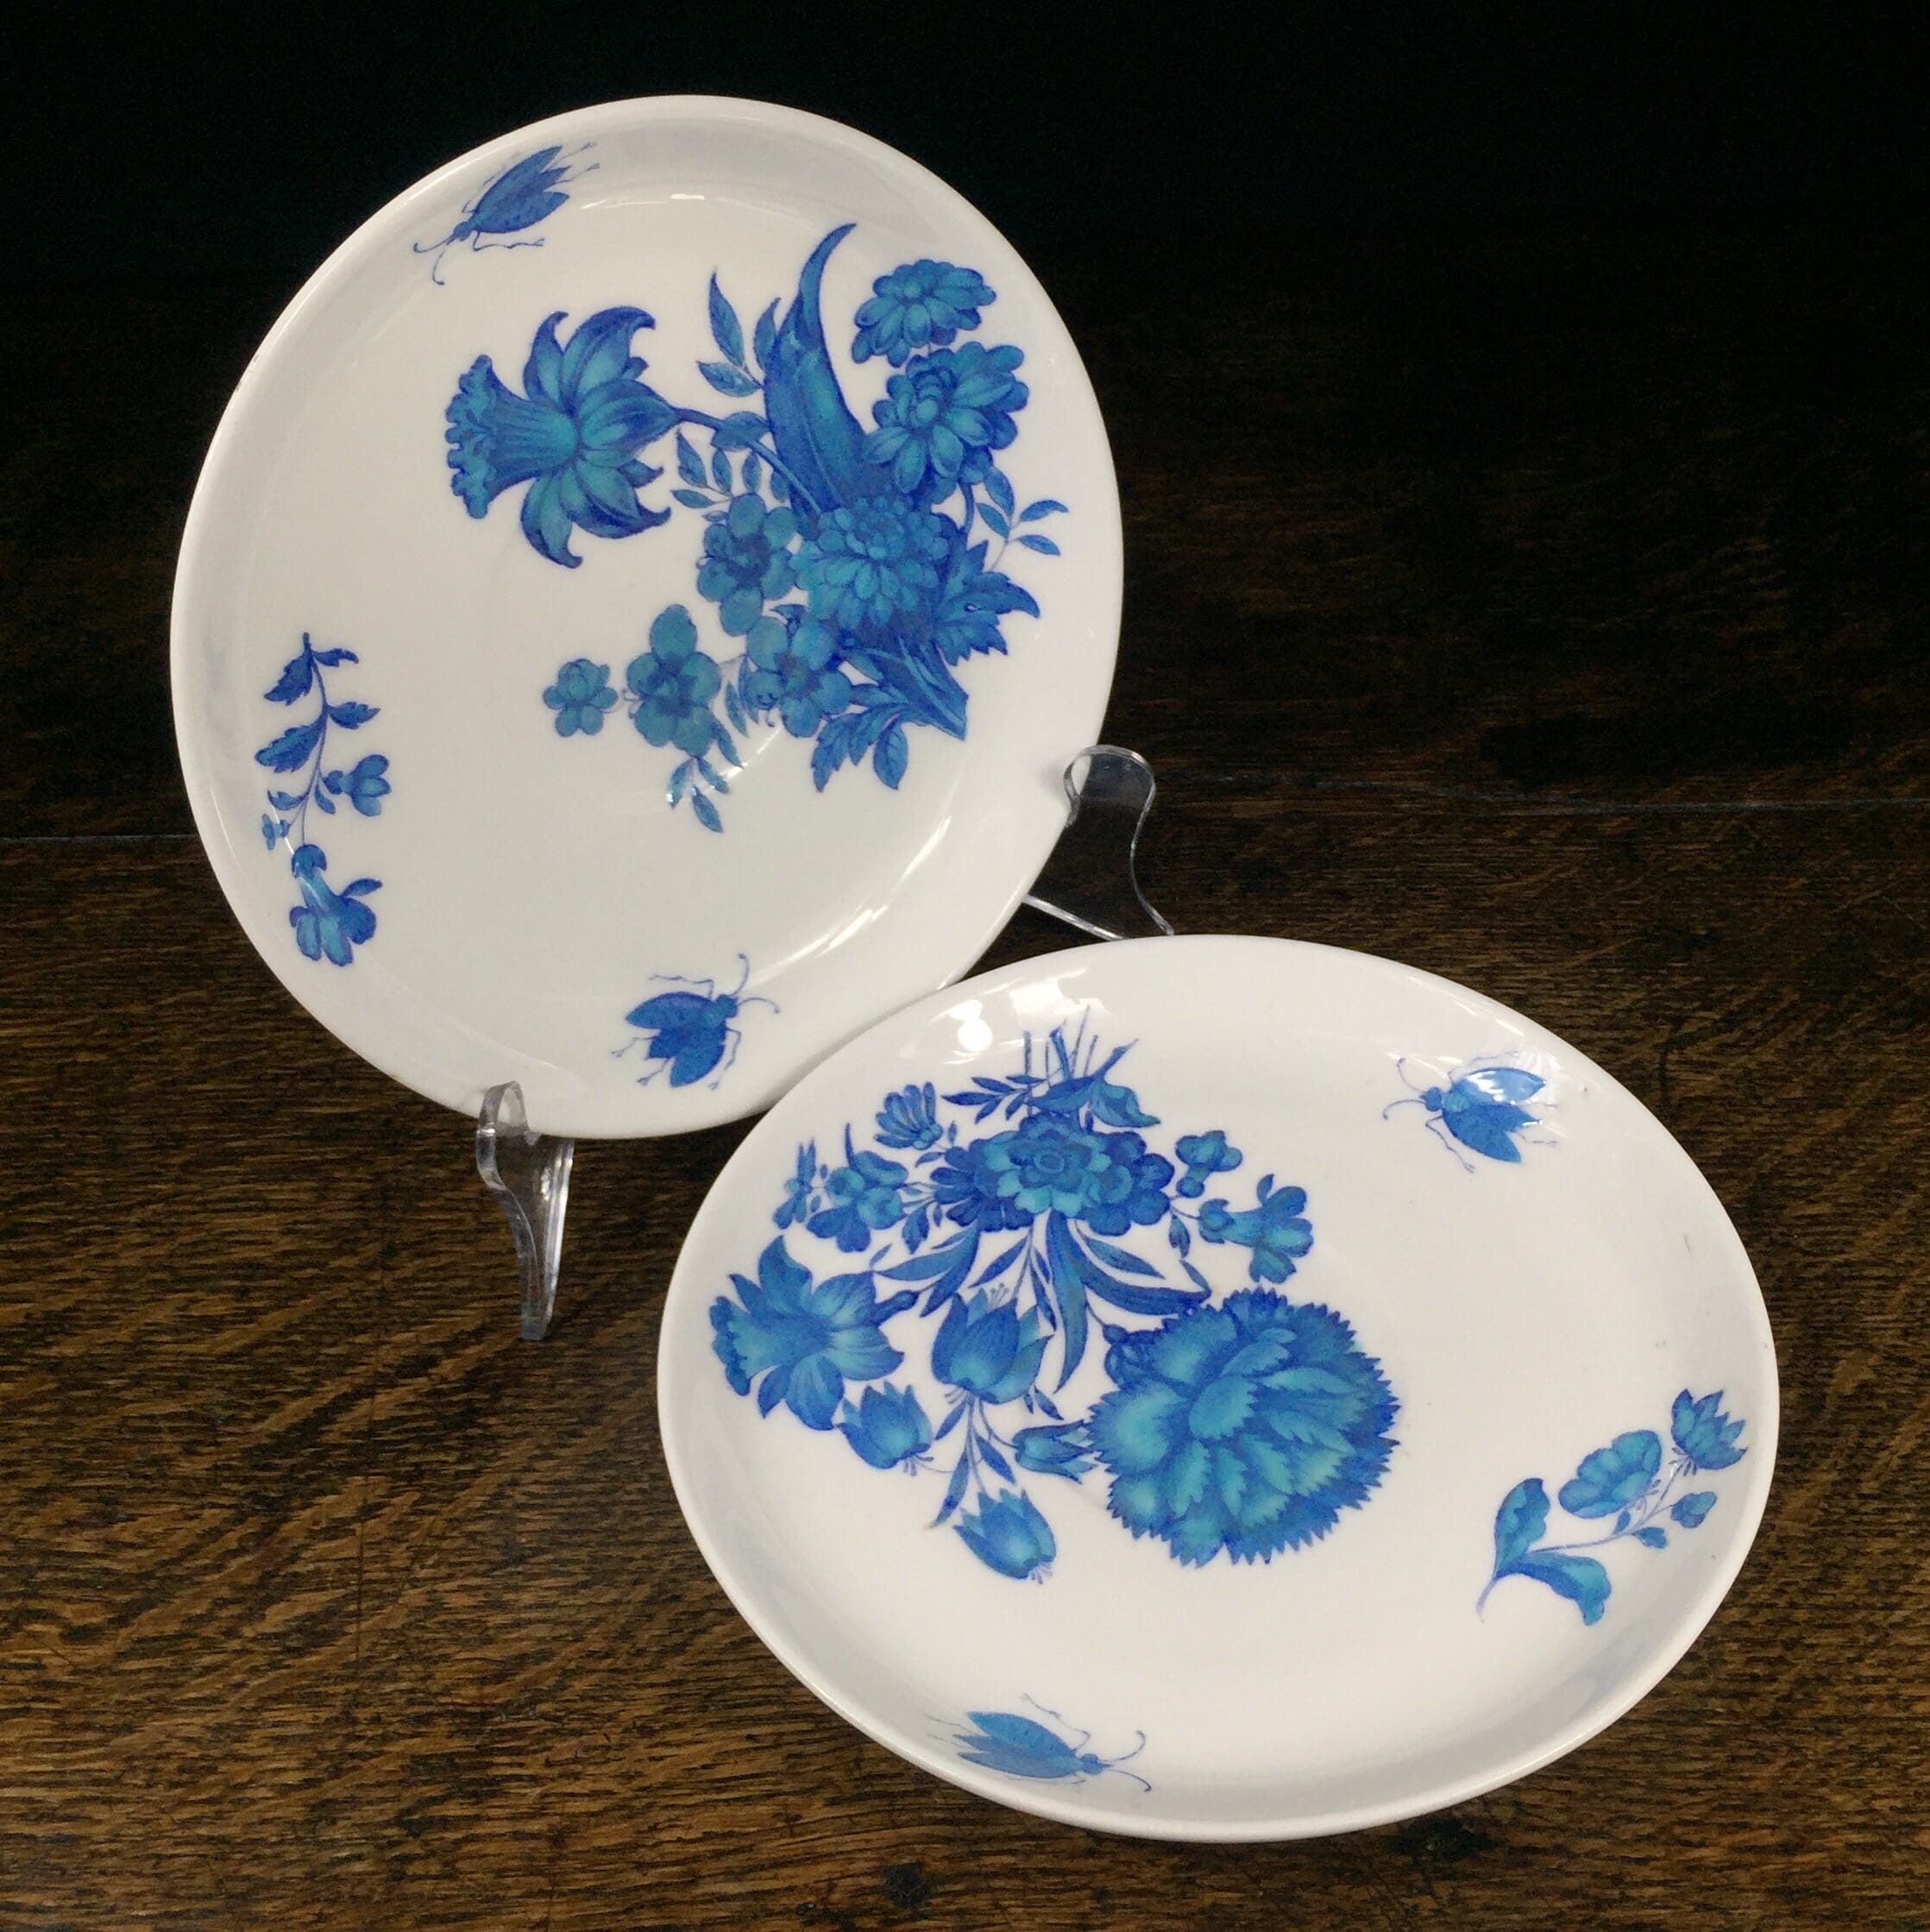 Pair of Minton dishes, turquoise flowers, pat. B308, dated 1873-0